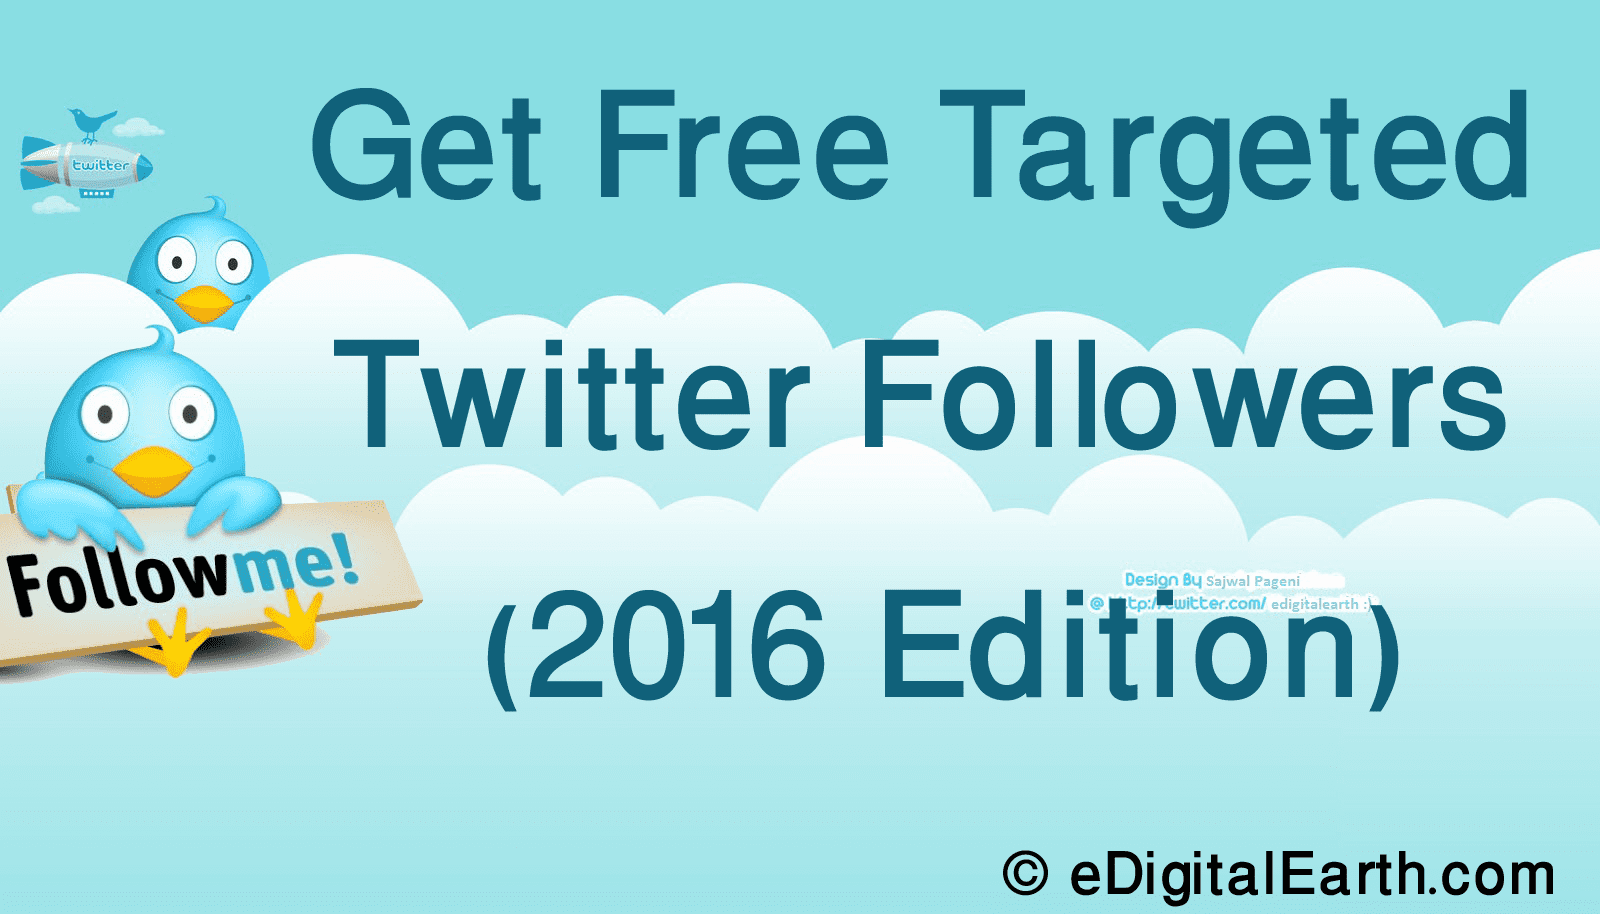 get free targeted twitter followers.